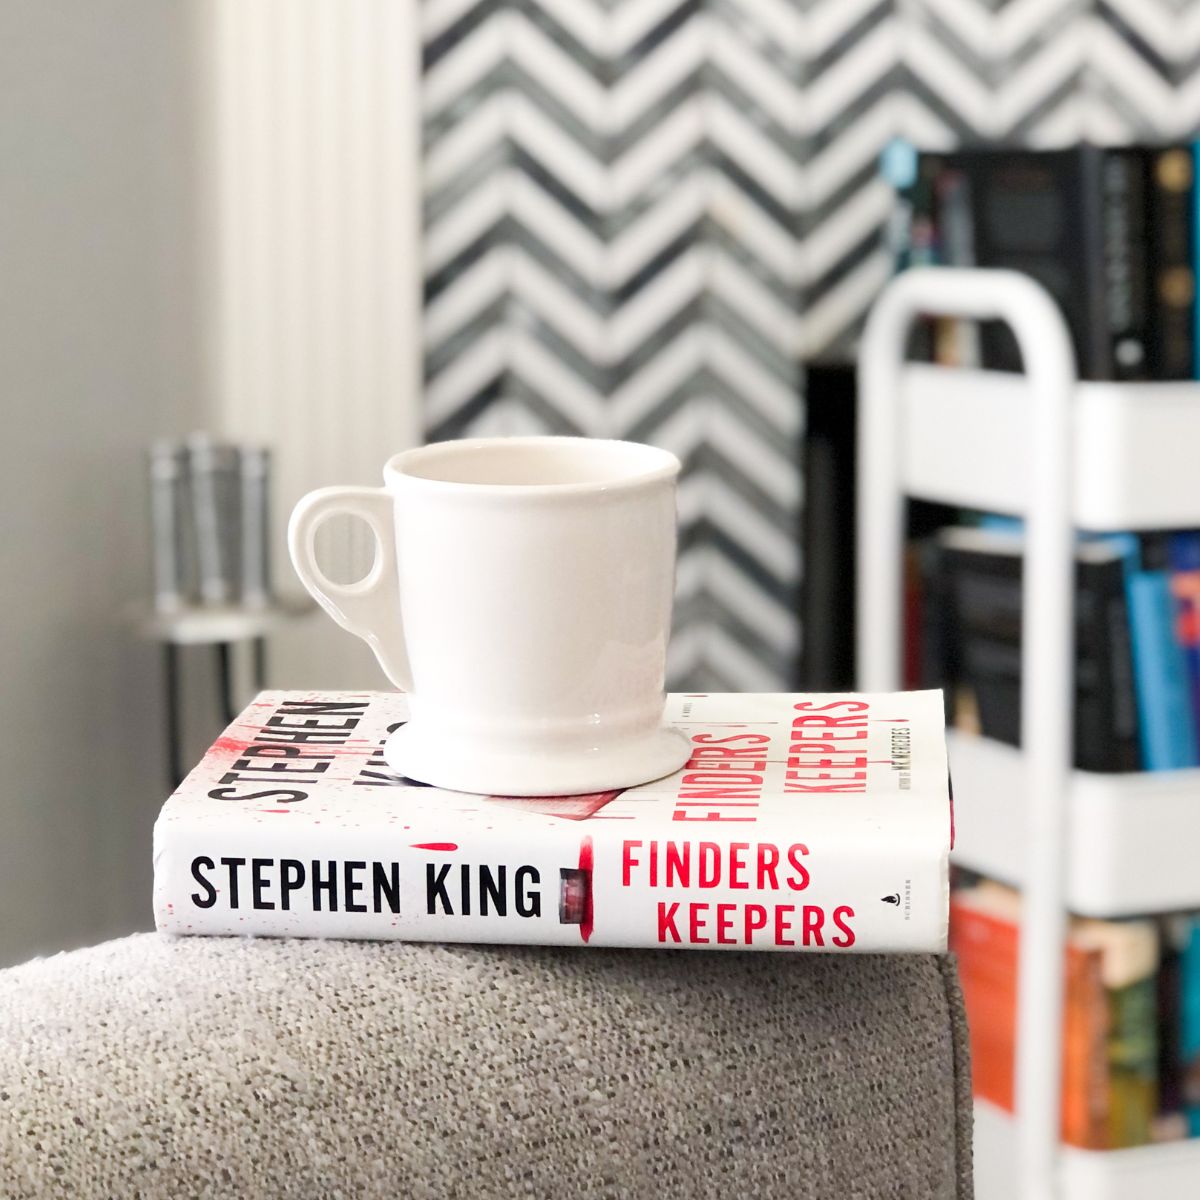 Stephen King hardcover mystery novel sitting on a grey chair with a coffee mug on top